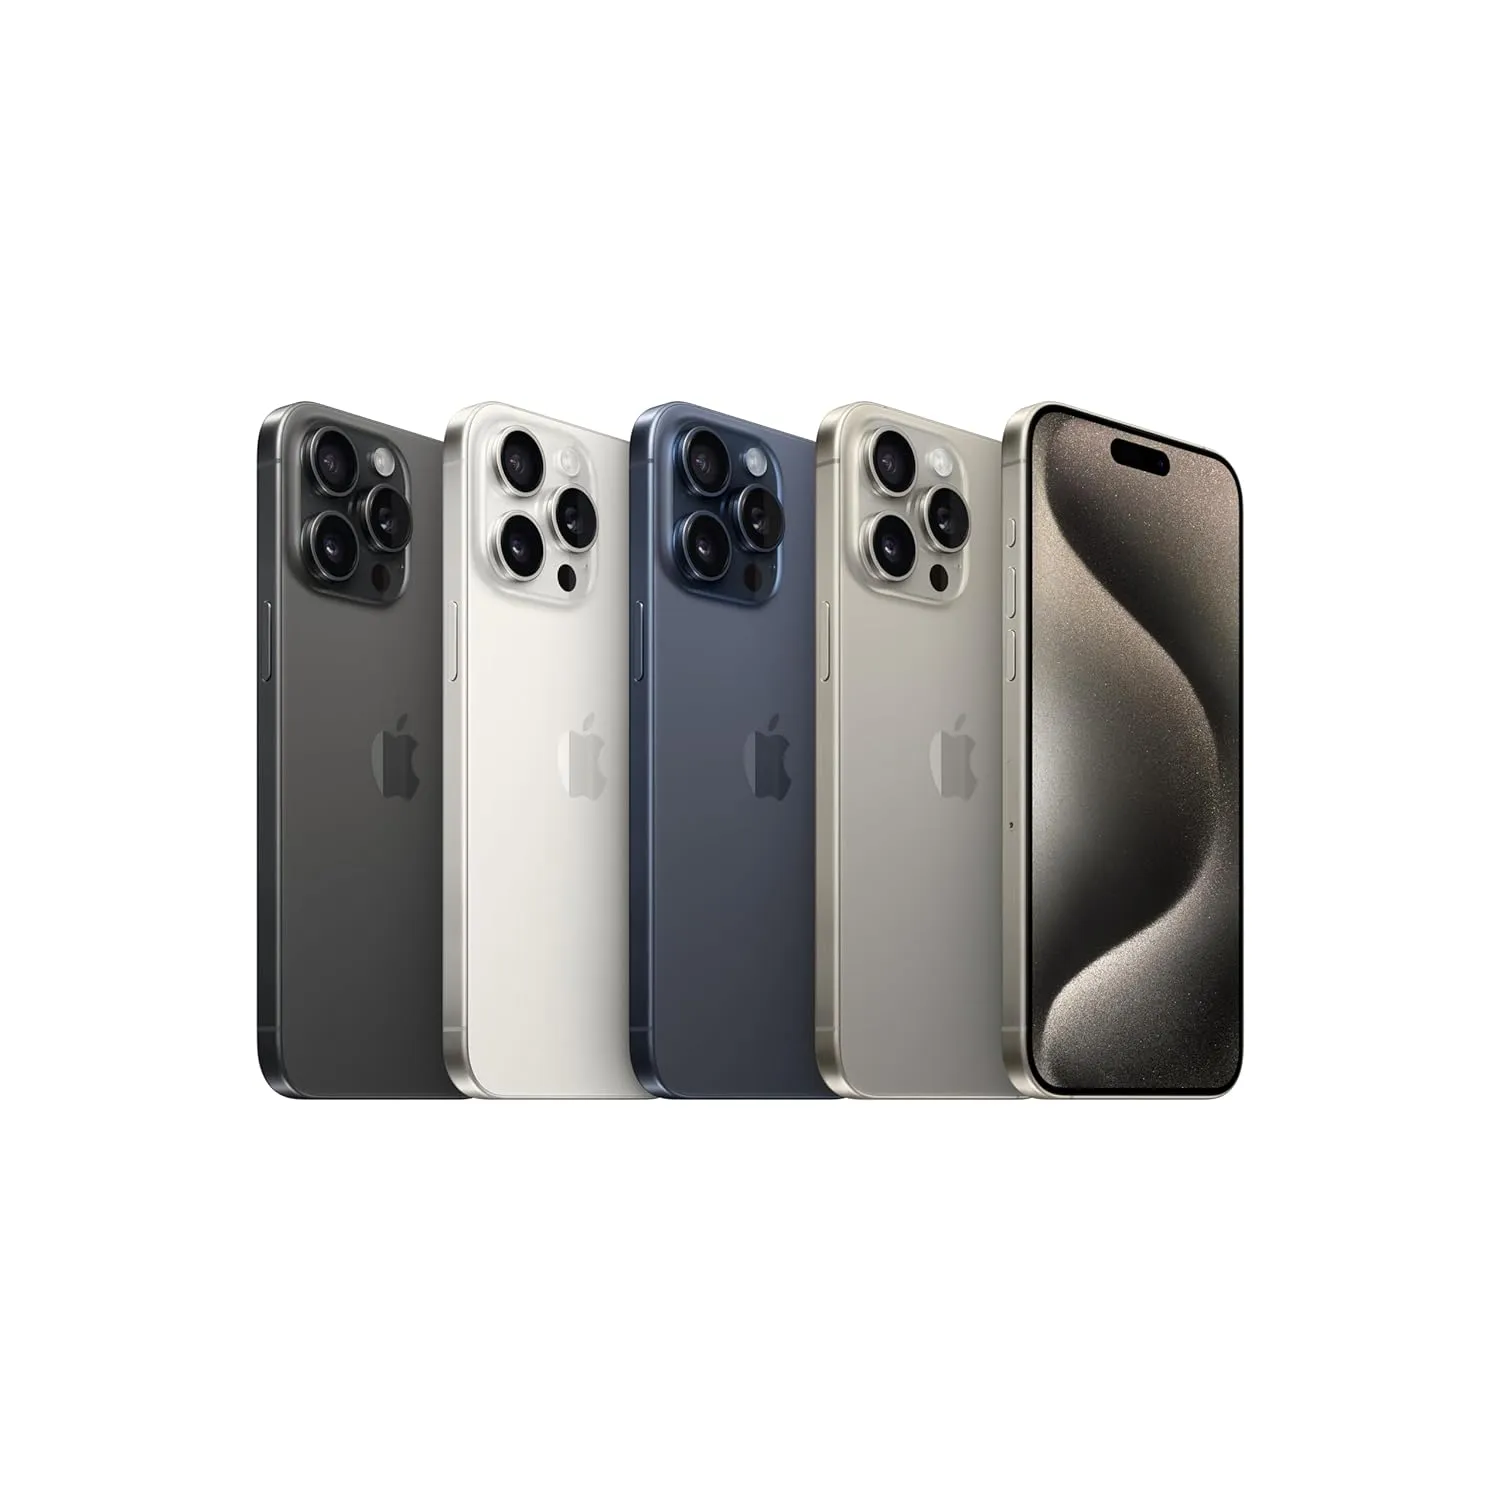 Apple iPhone 15 Pro Max 256 GB Blue Titanium Reviews | Price, Specification, Colours and Other Details